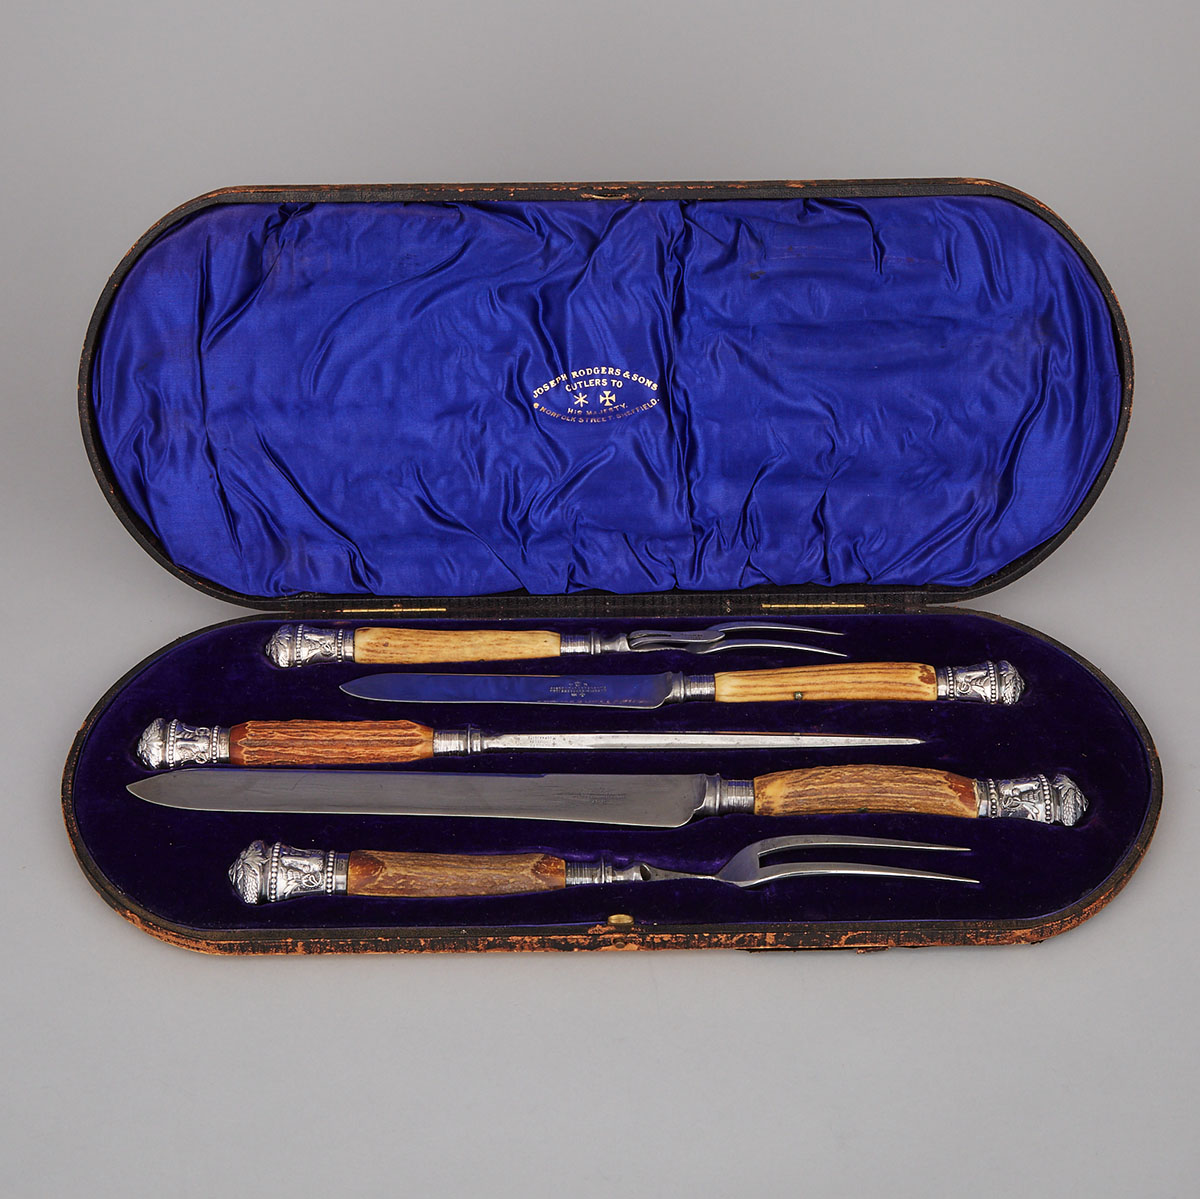 English Silver Mounted Carving Set, Joseph Rodgers & Sons, Sheffield, 1902